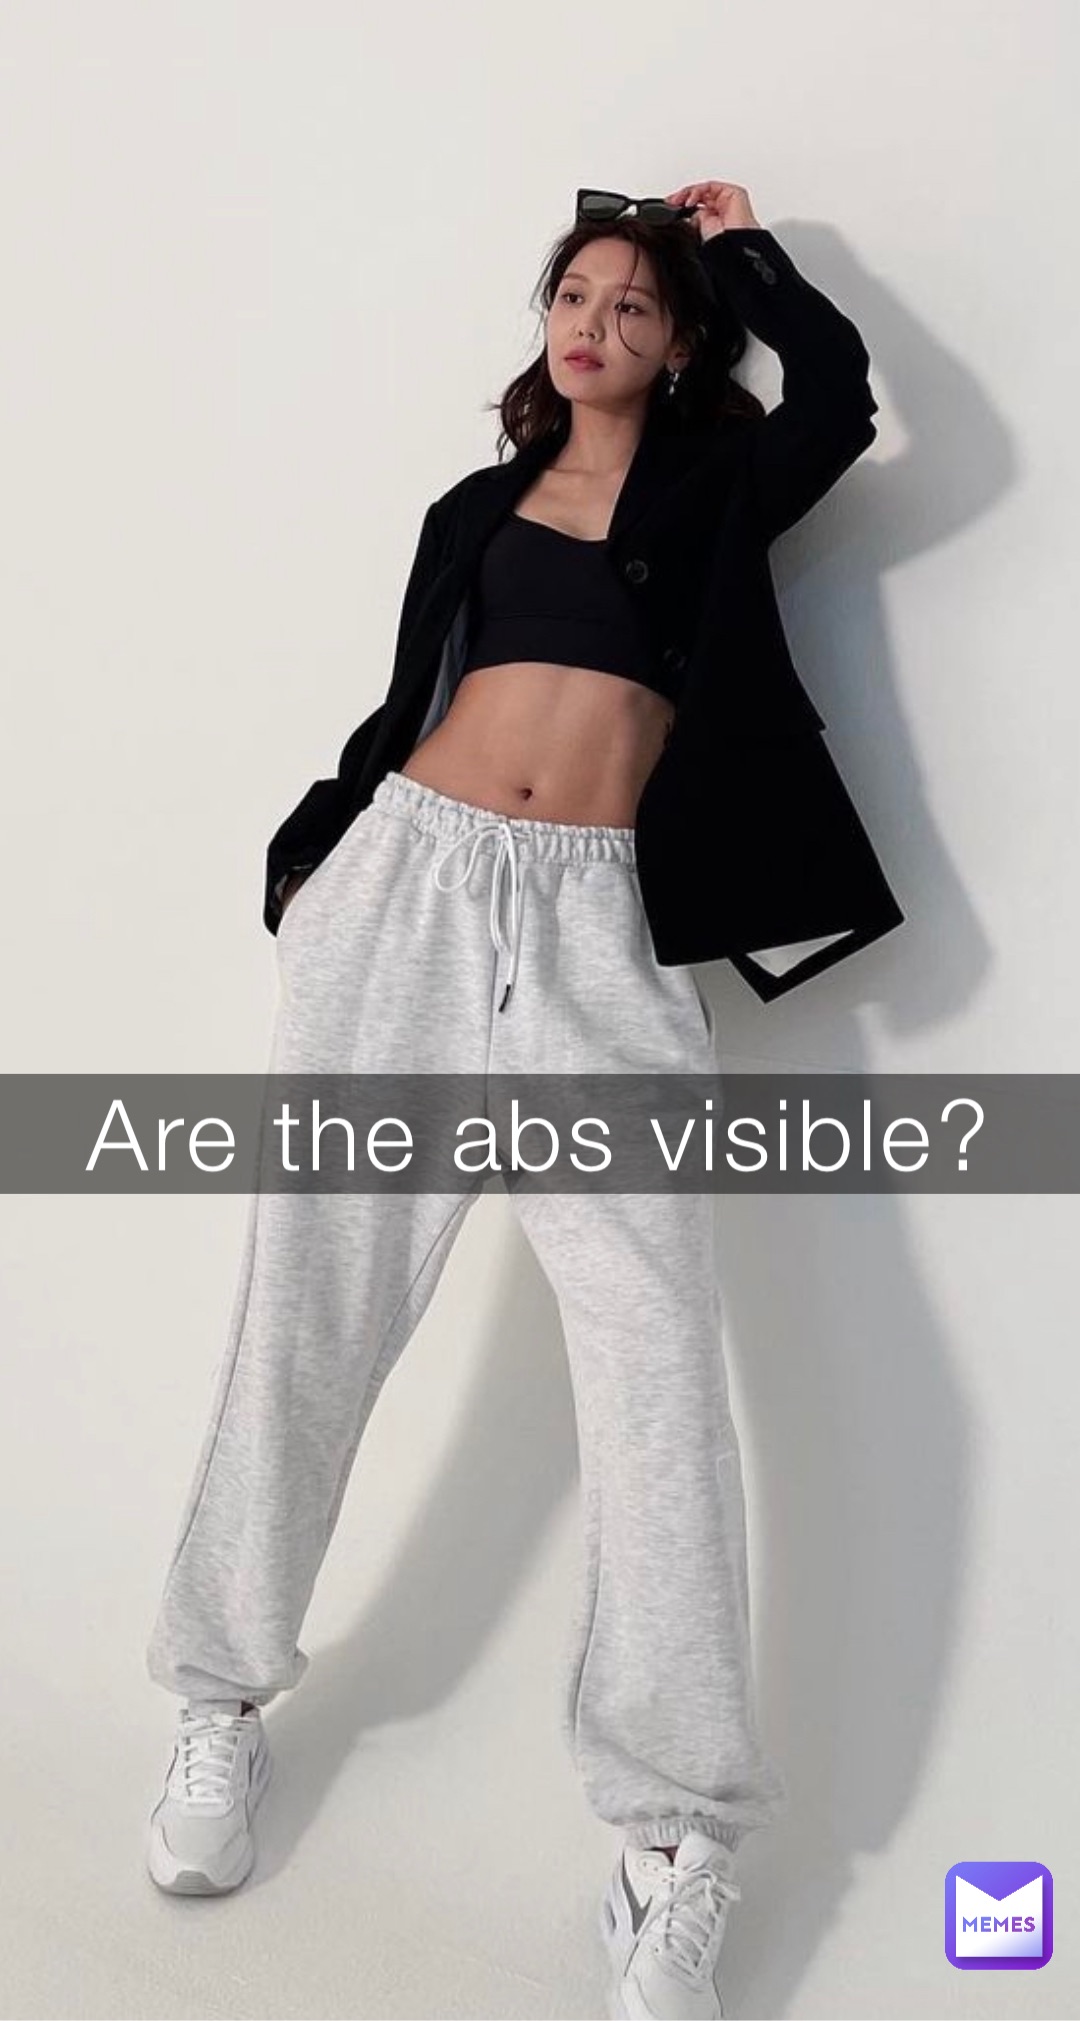 Are the abs visible?